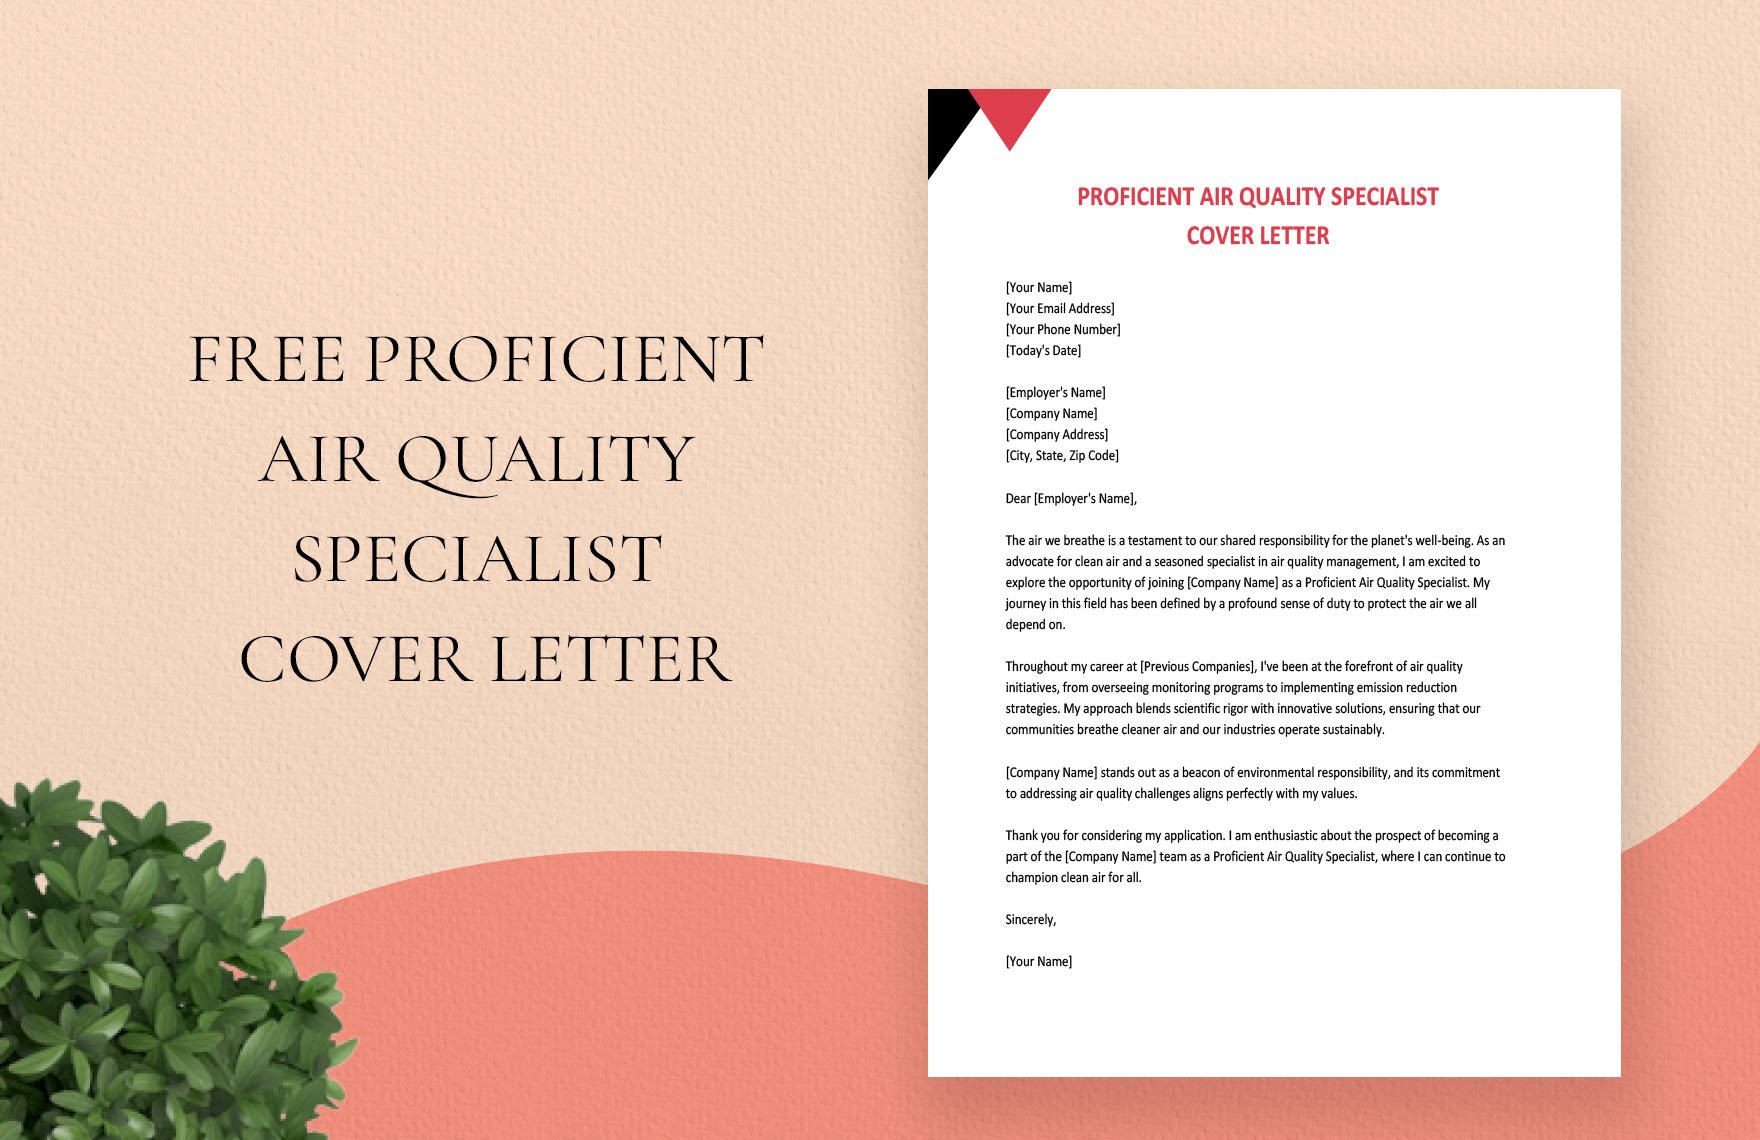 Proficient Air Quality Specialist Cover Letter in Word, Google Docs